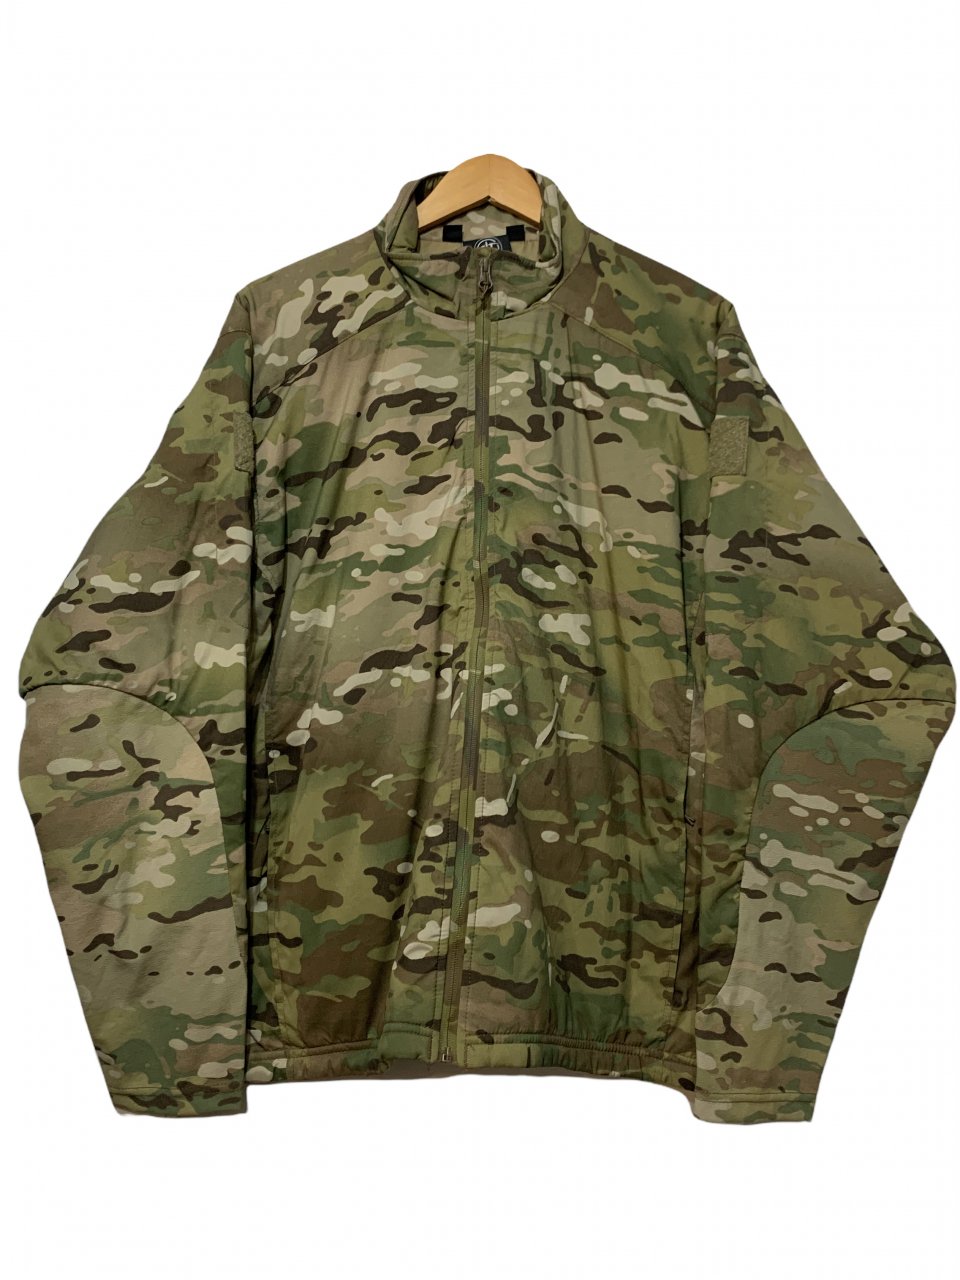 Deadstock USA製 WILD THINGS TACTICAL Multicam Low Loft Jacket M 